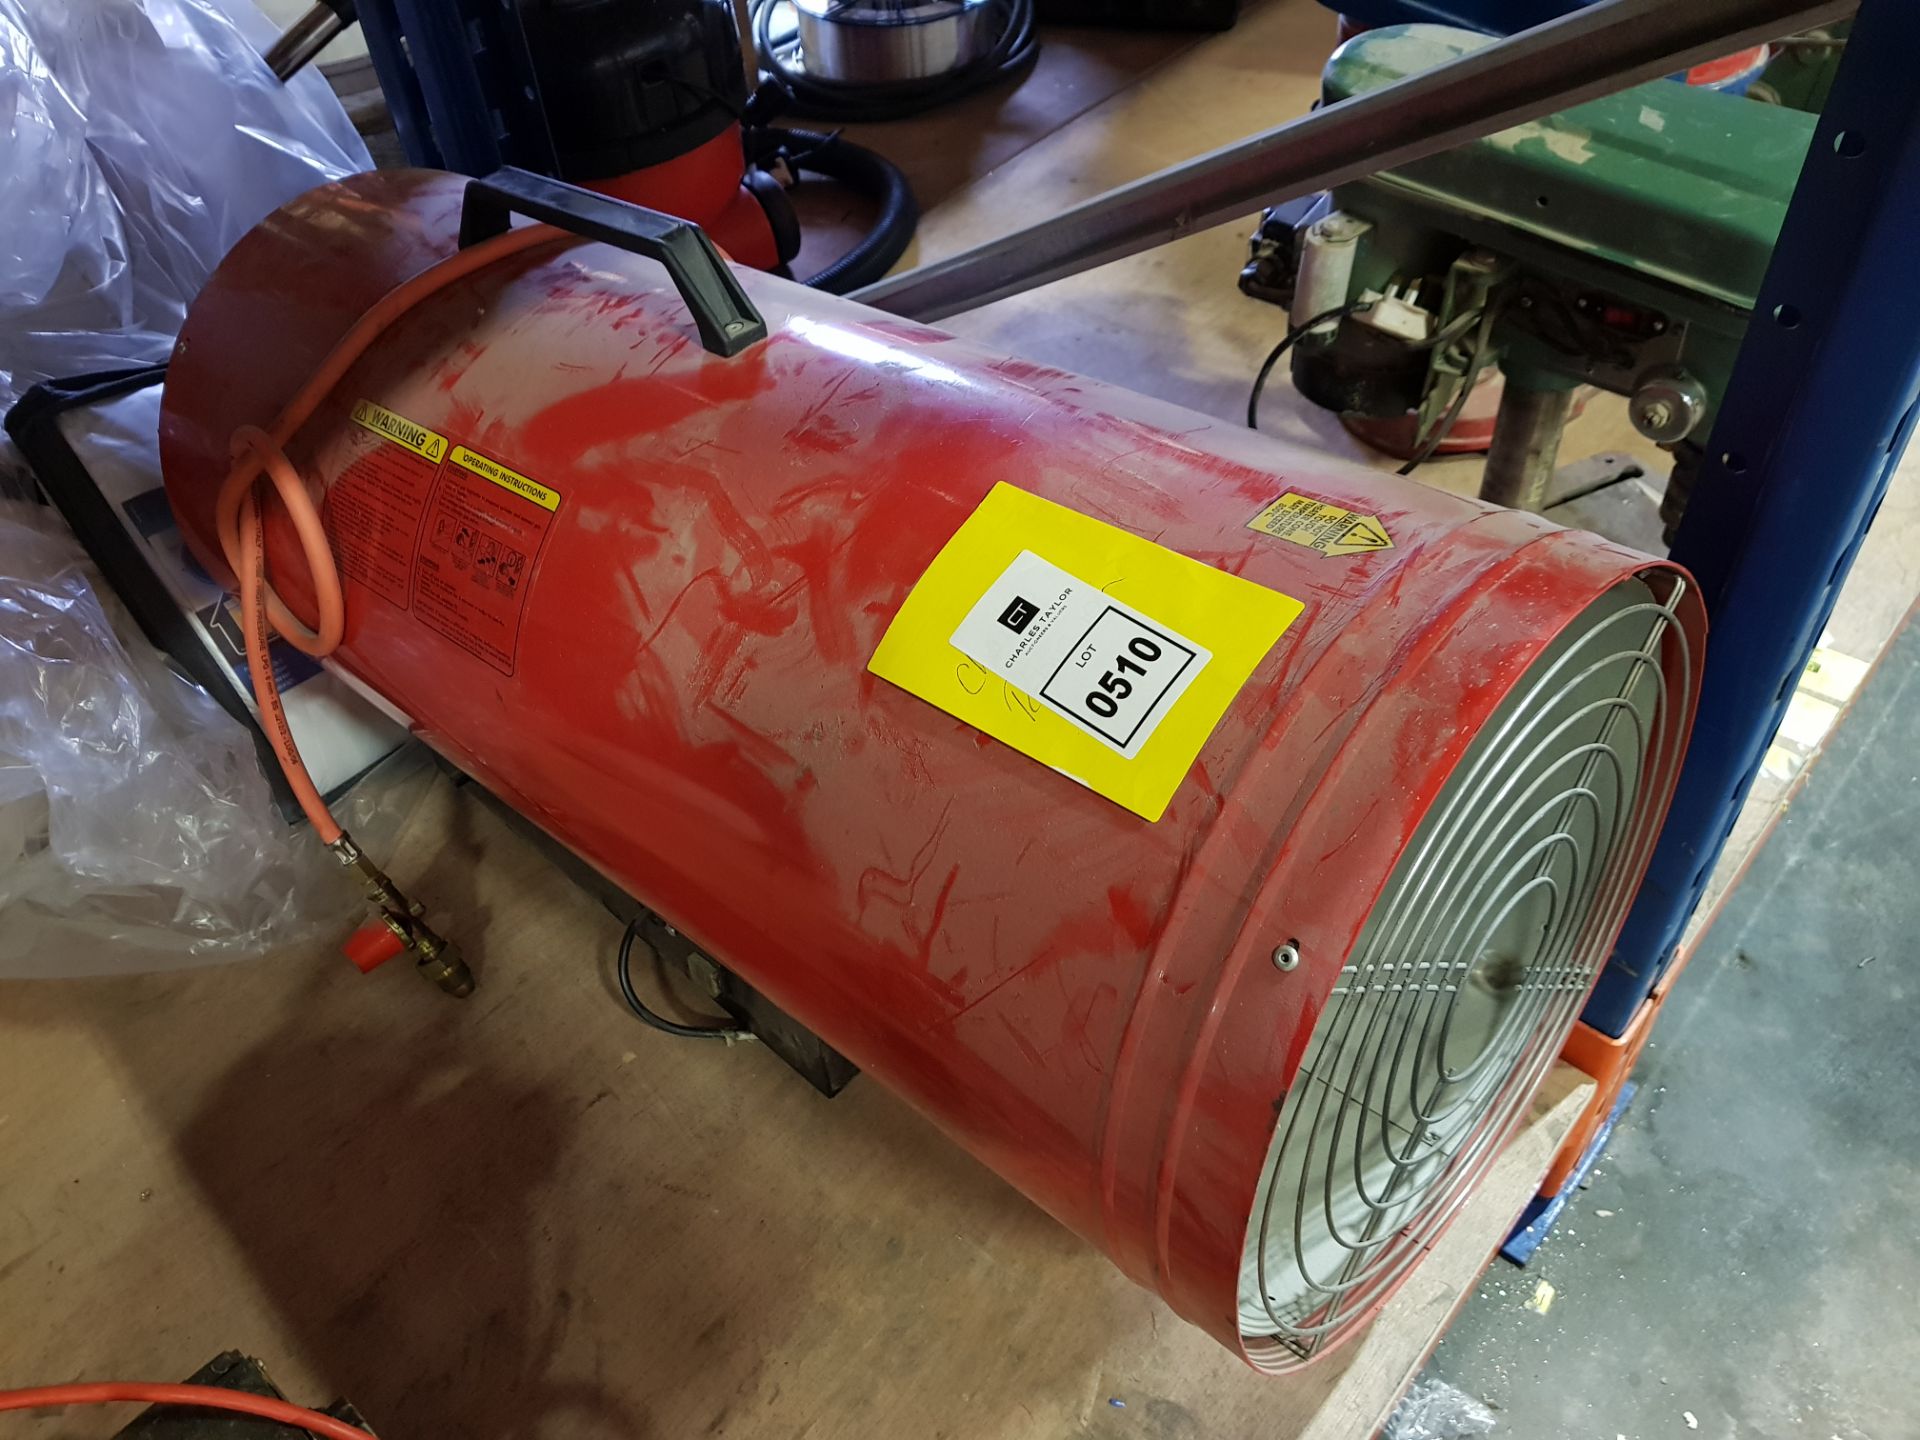 1 X CLARKE DEVIL 3000 SPACE HEATER - WITH GAS HOSE